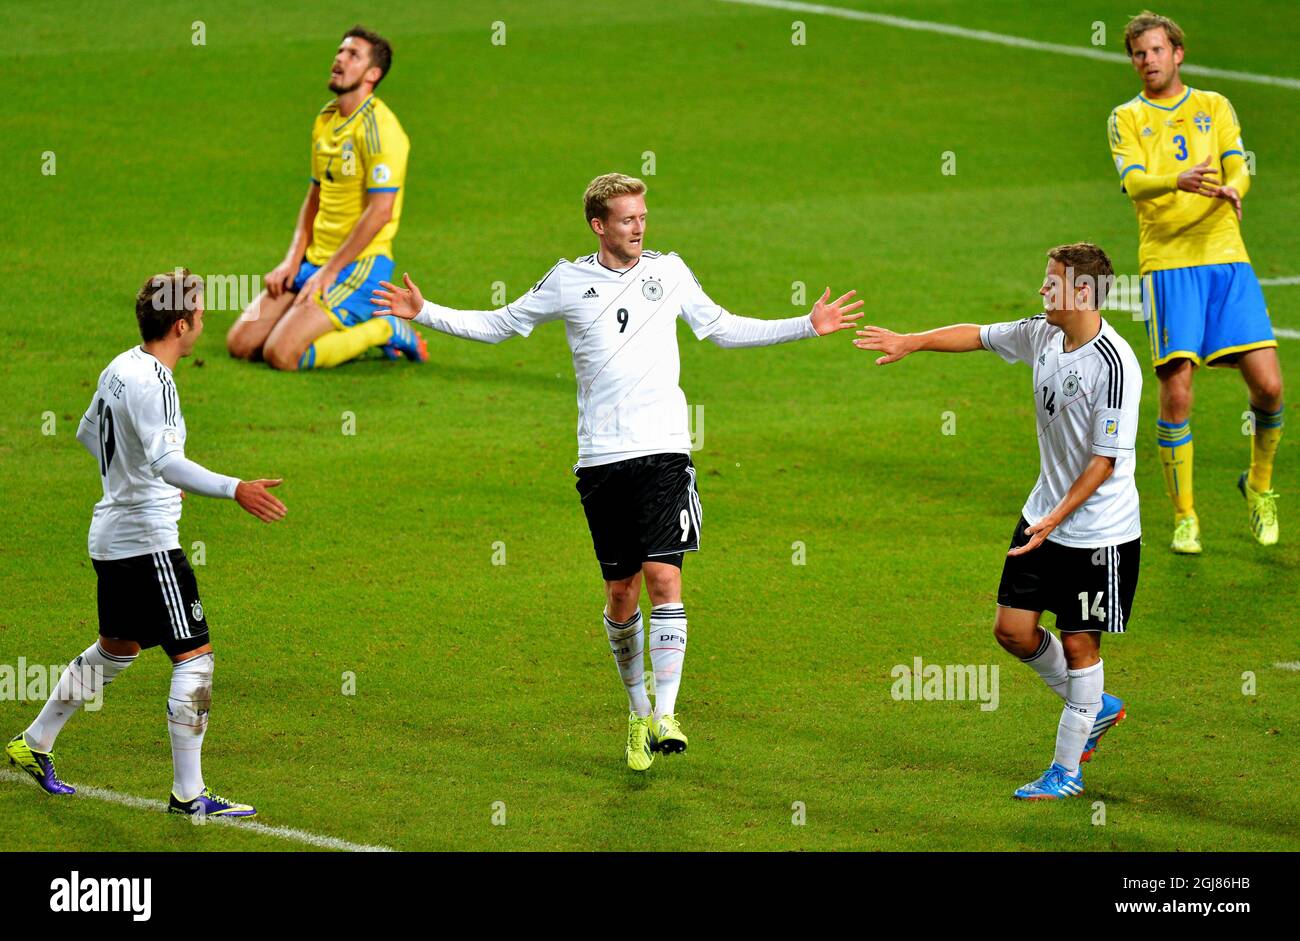 Germany's Andre Schuerrle (C) celebrates scoring with teammates Mario Goetze (L) and Max Kruse while Sweden's Per Nilsson (far L) and Mikael Antonsson look dejected during the 2014 World Cup group C qualifying soccer match between Sweden and Germany at Friends Arena in Stockholm, Sweden, on Oct. 15, 2013. Poto: Jonas Ekstromer / TT / code 10030  Stock Photo